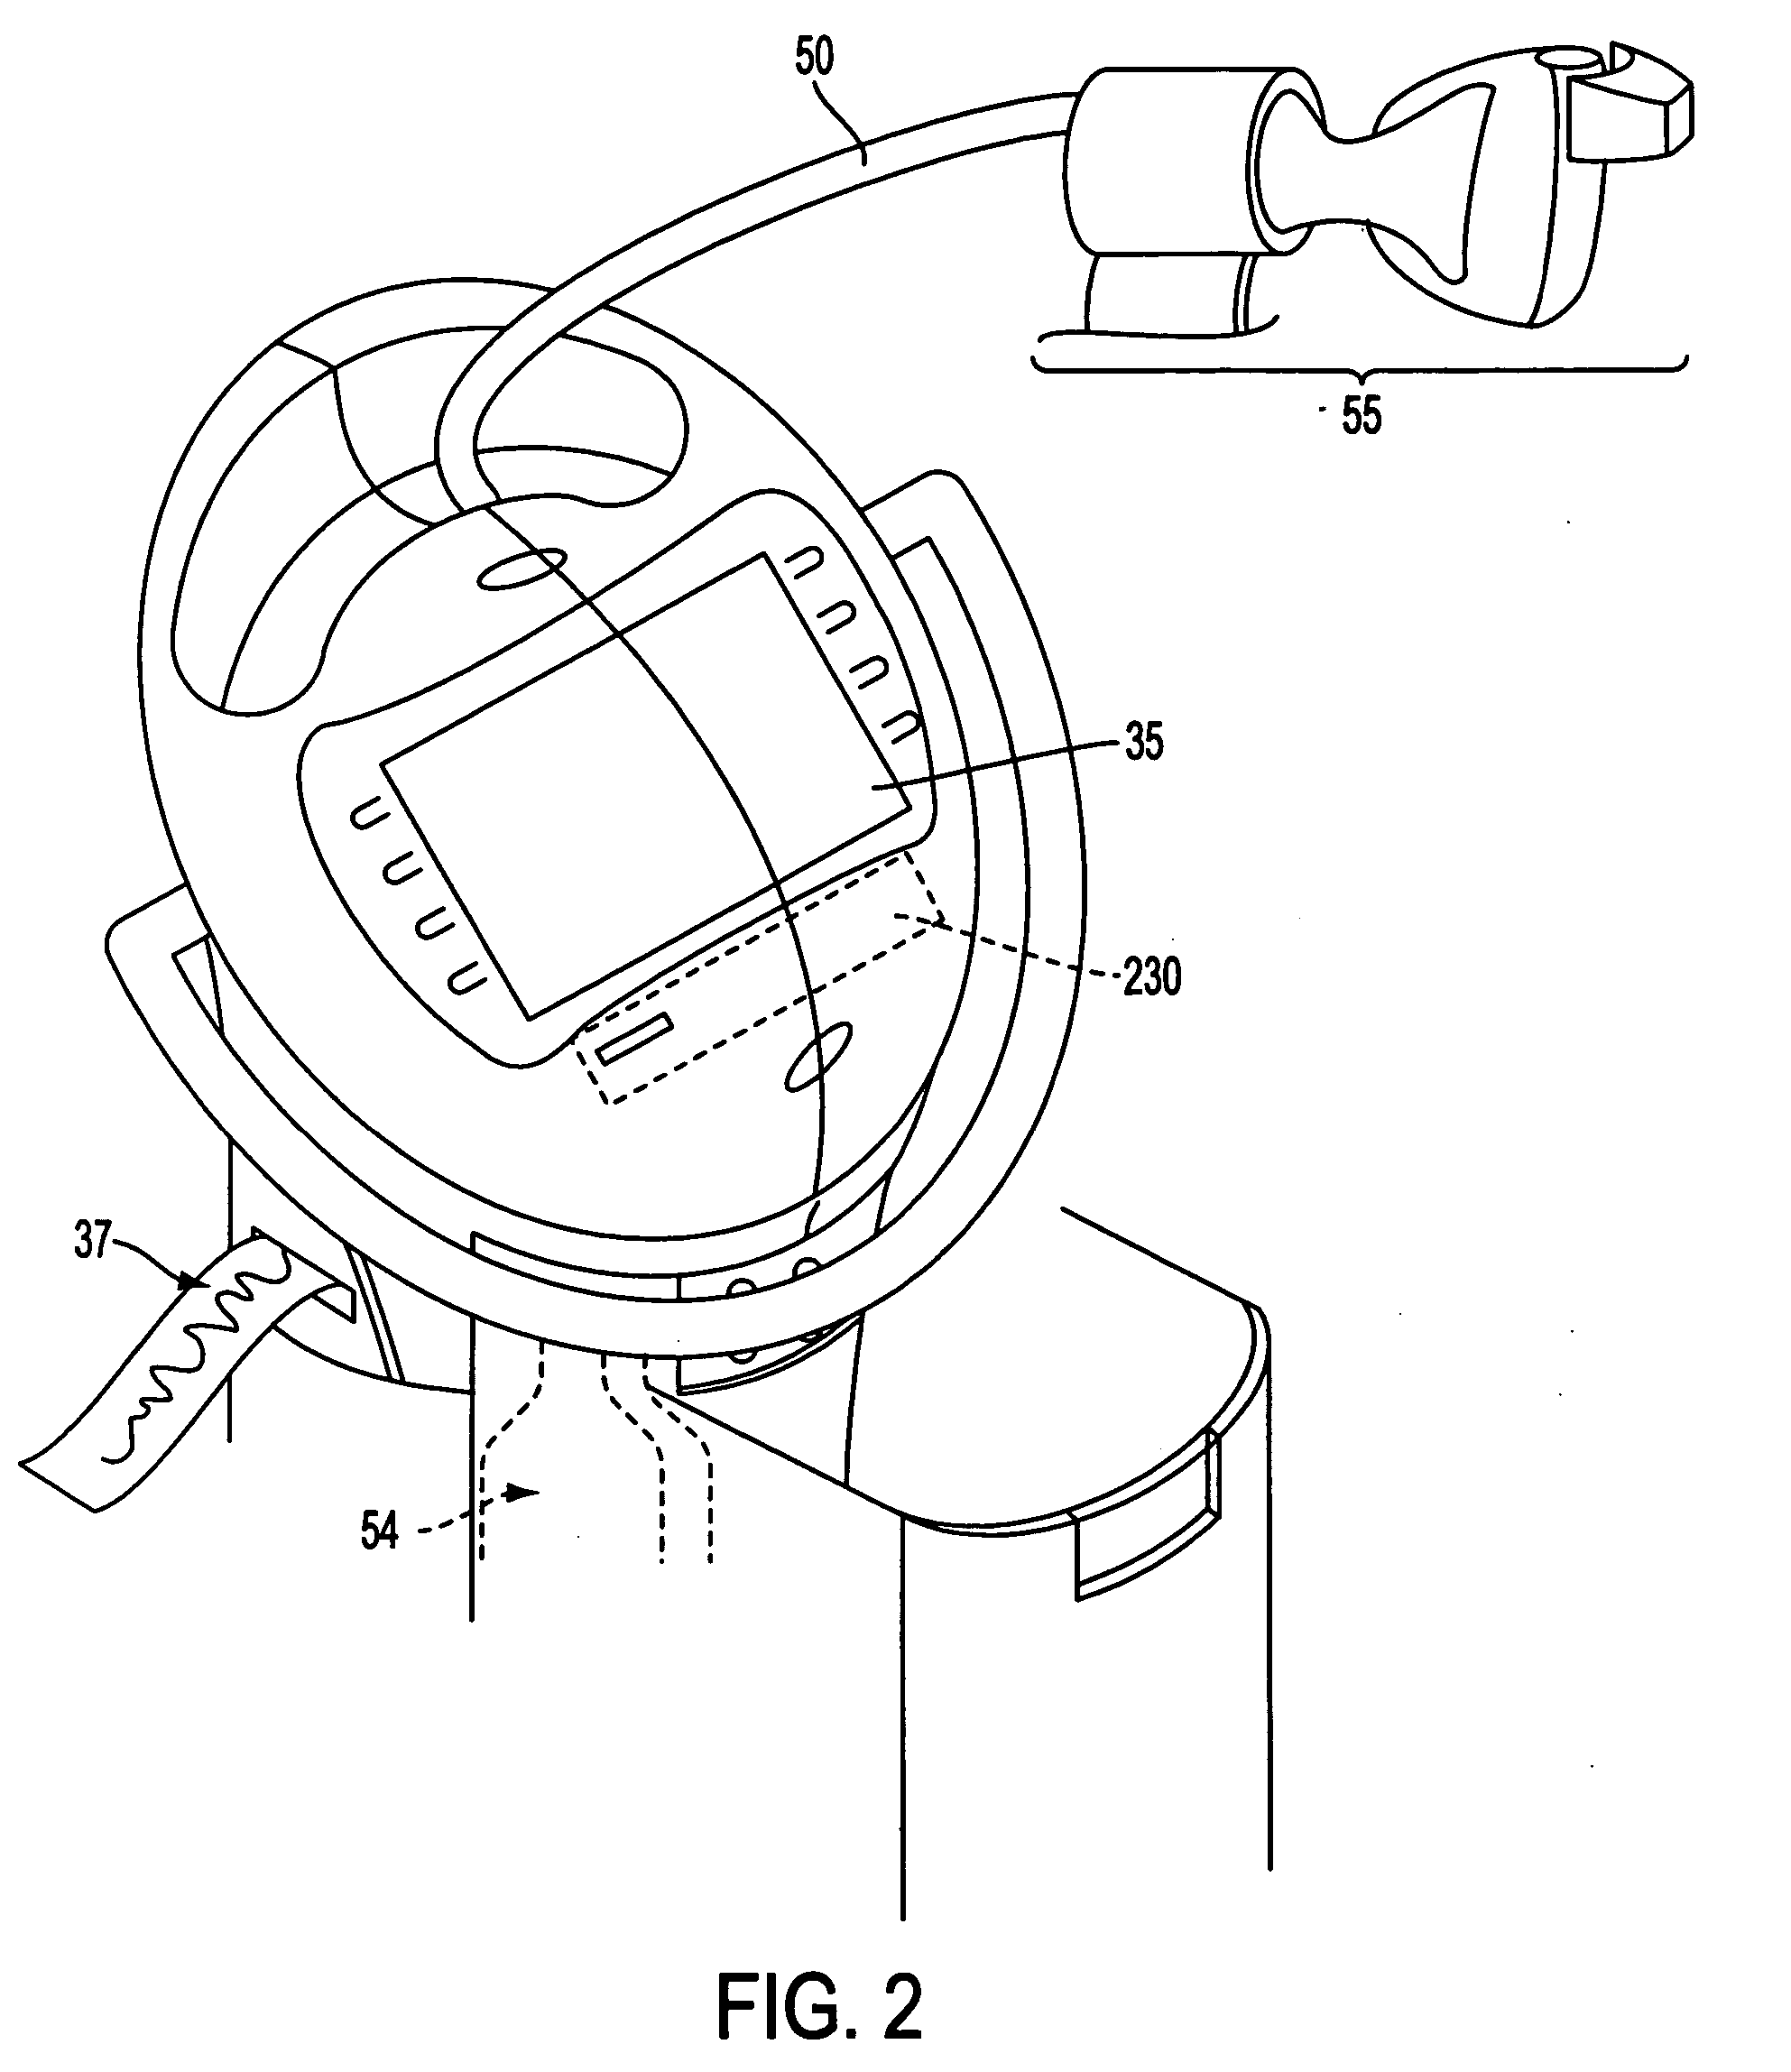 Apparatus for drug delivery in association with medical or surgical procedures